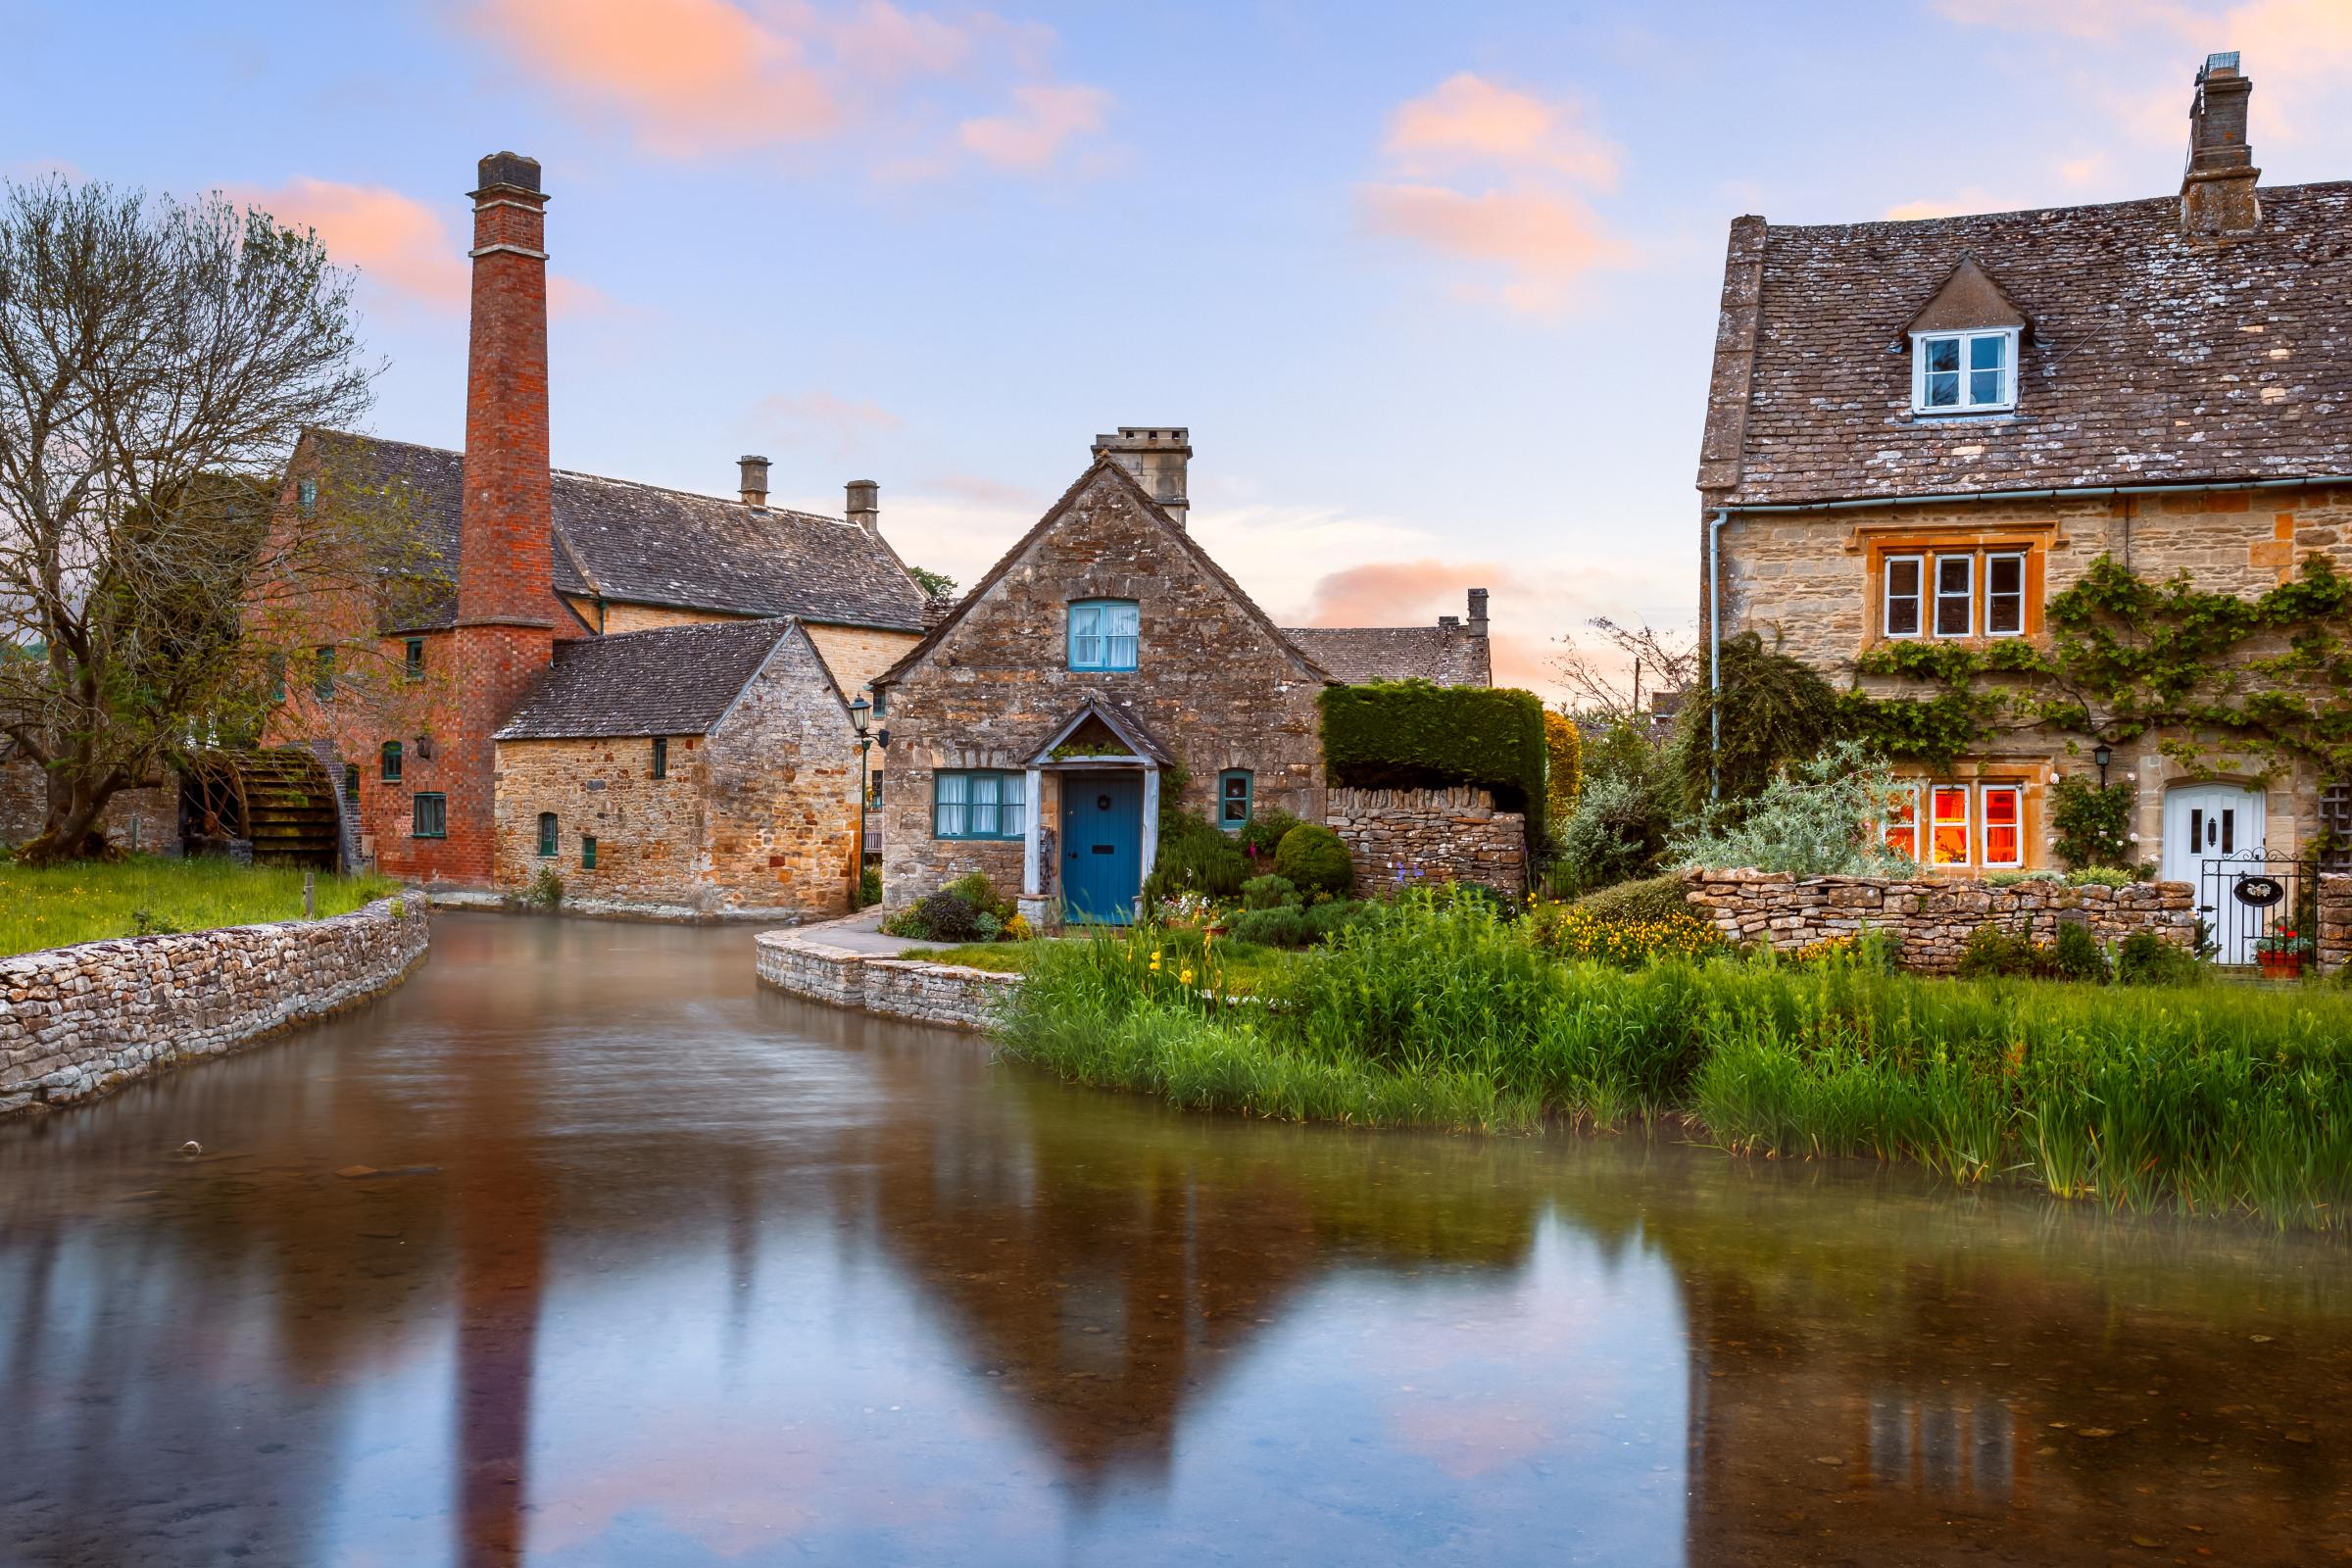 Lower Slaughter, Cotswolds, Gloucestershire, UK